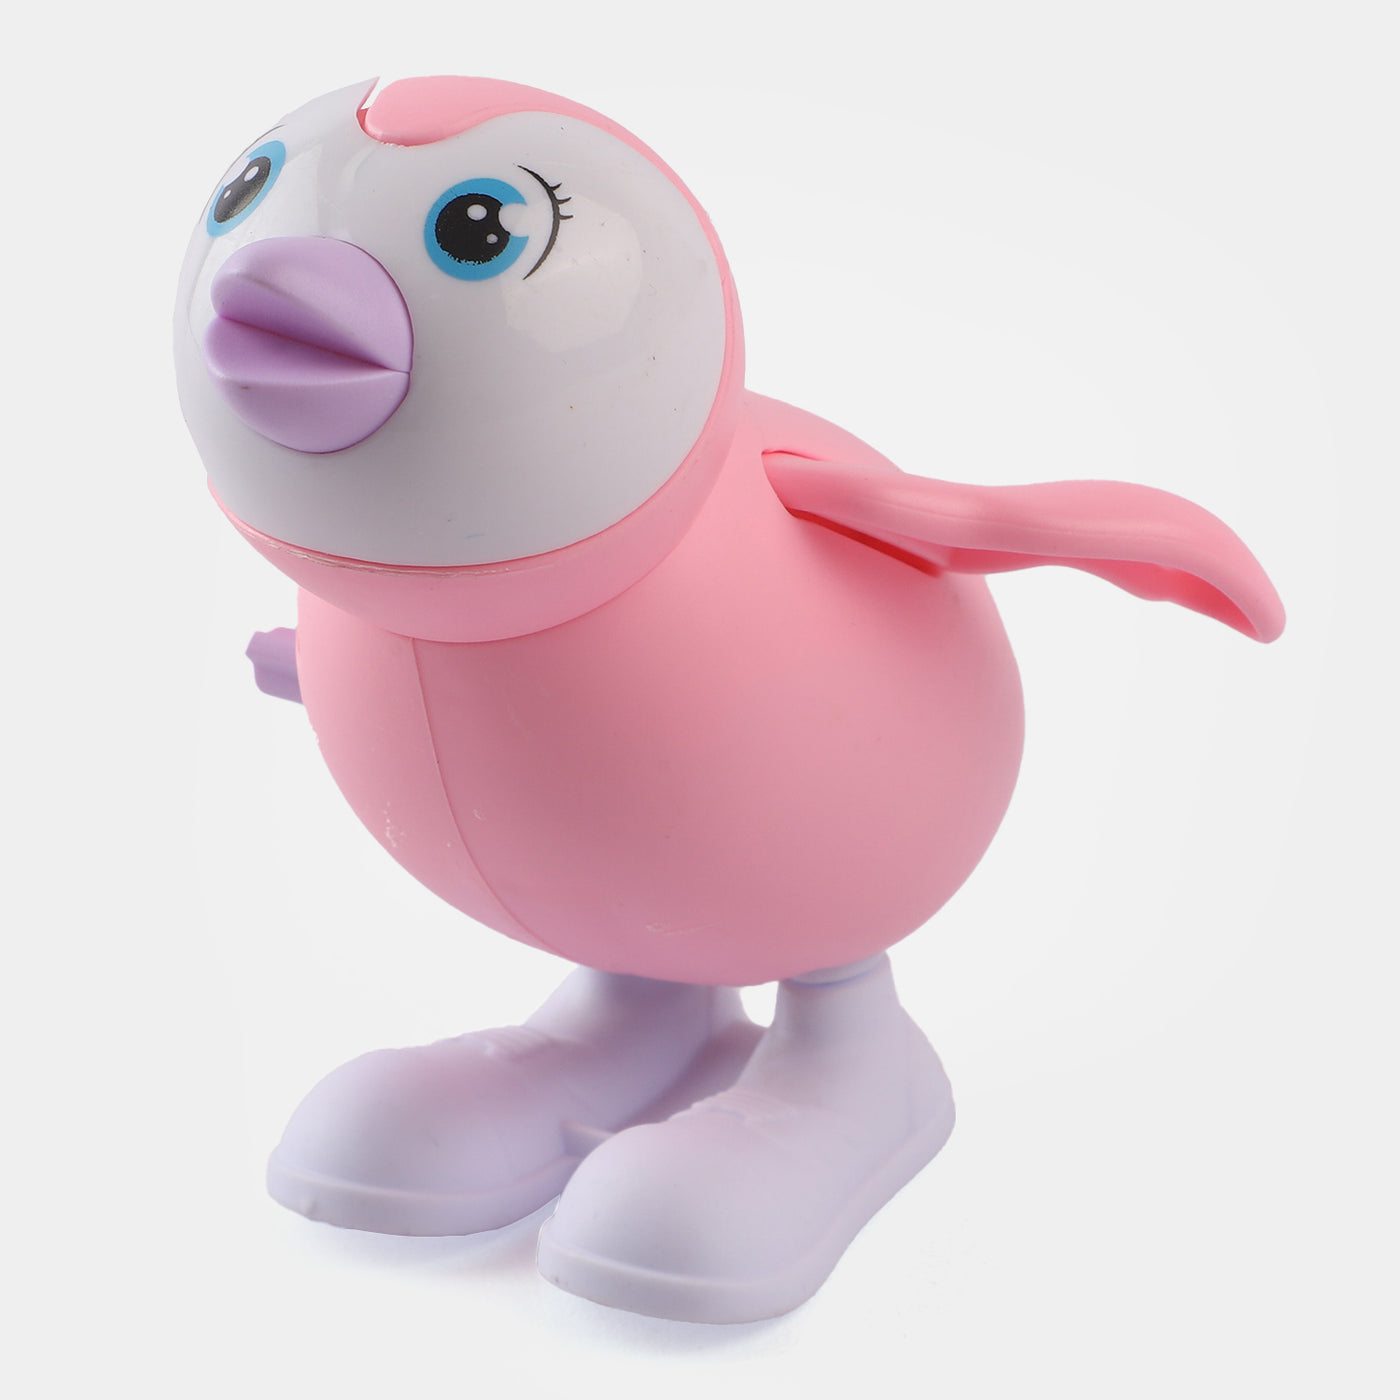 Wind Up Penguin Play Toy For Kids